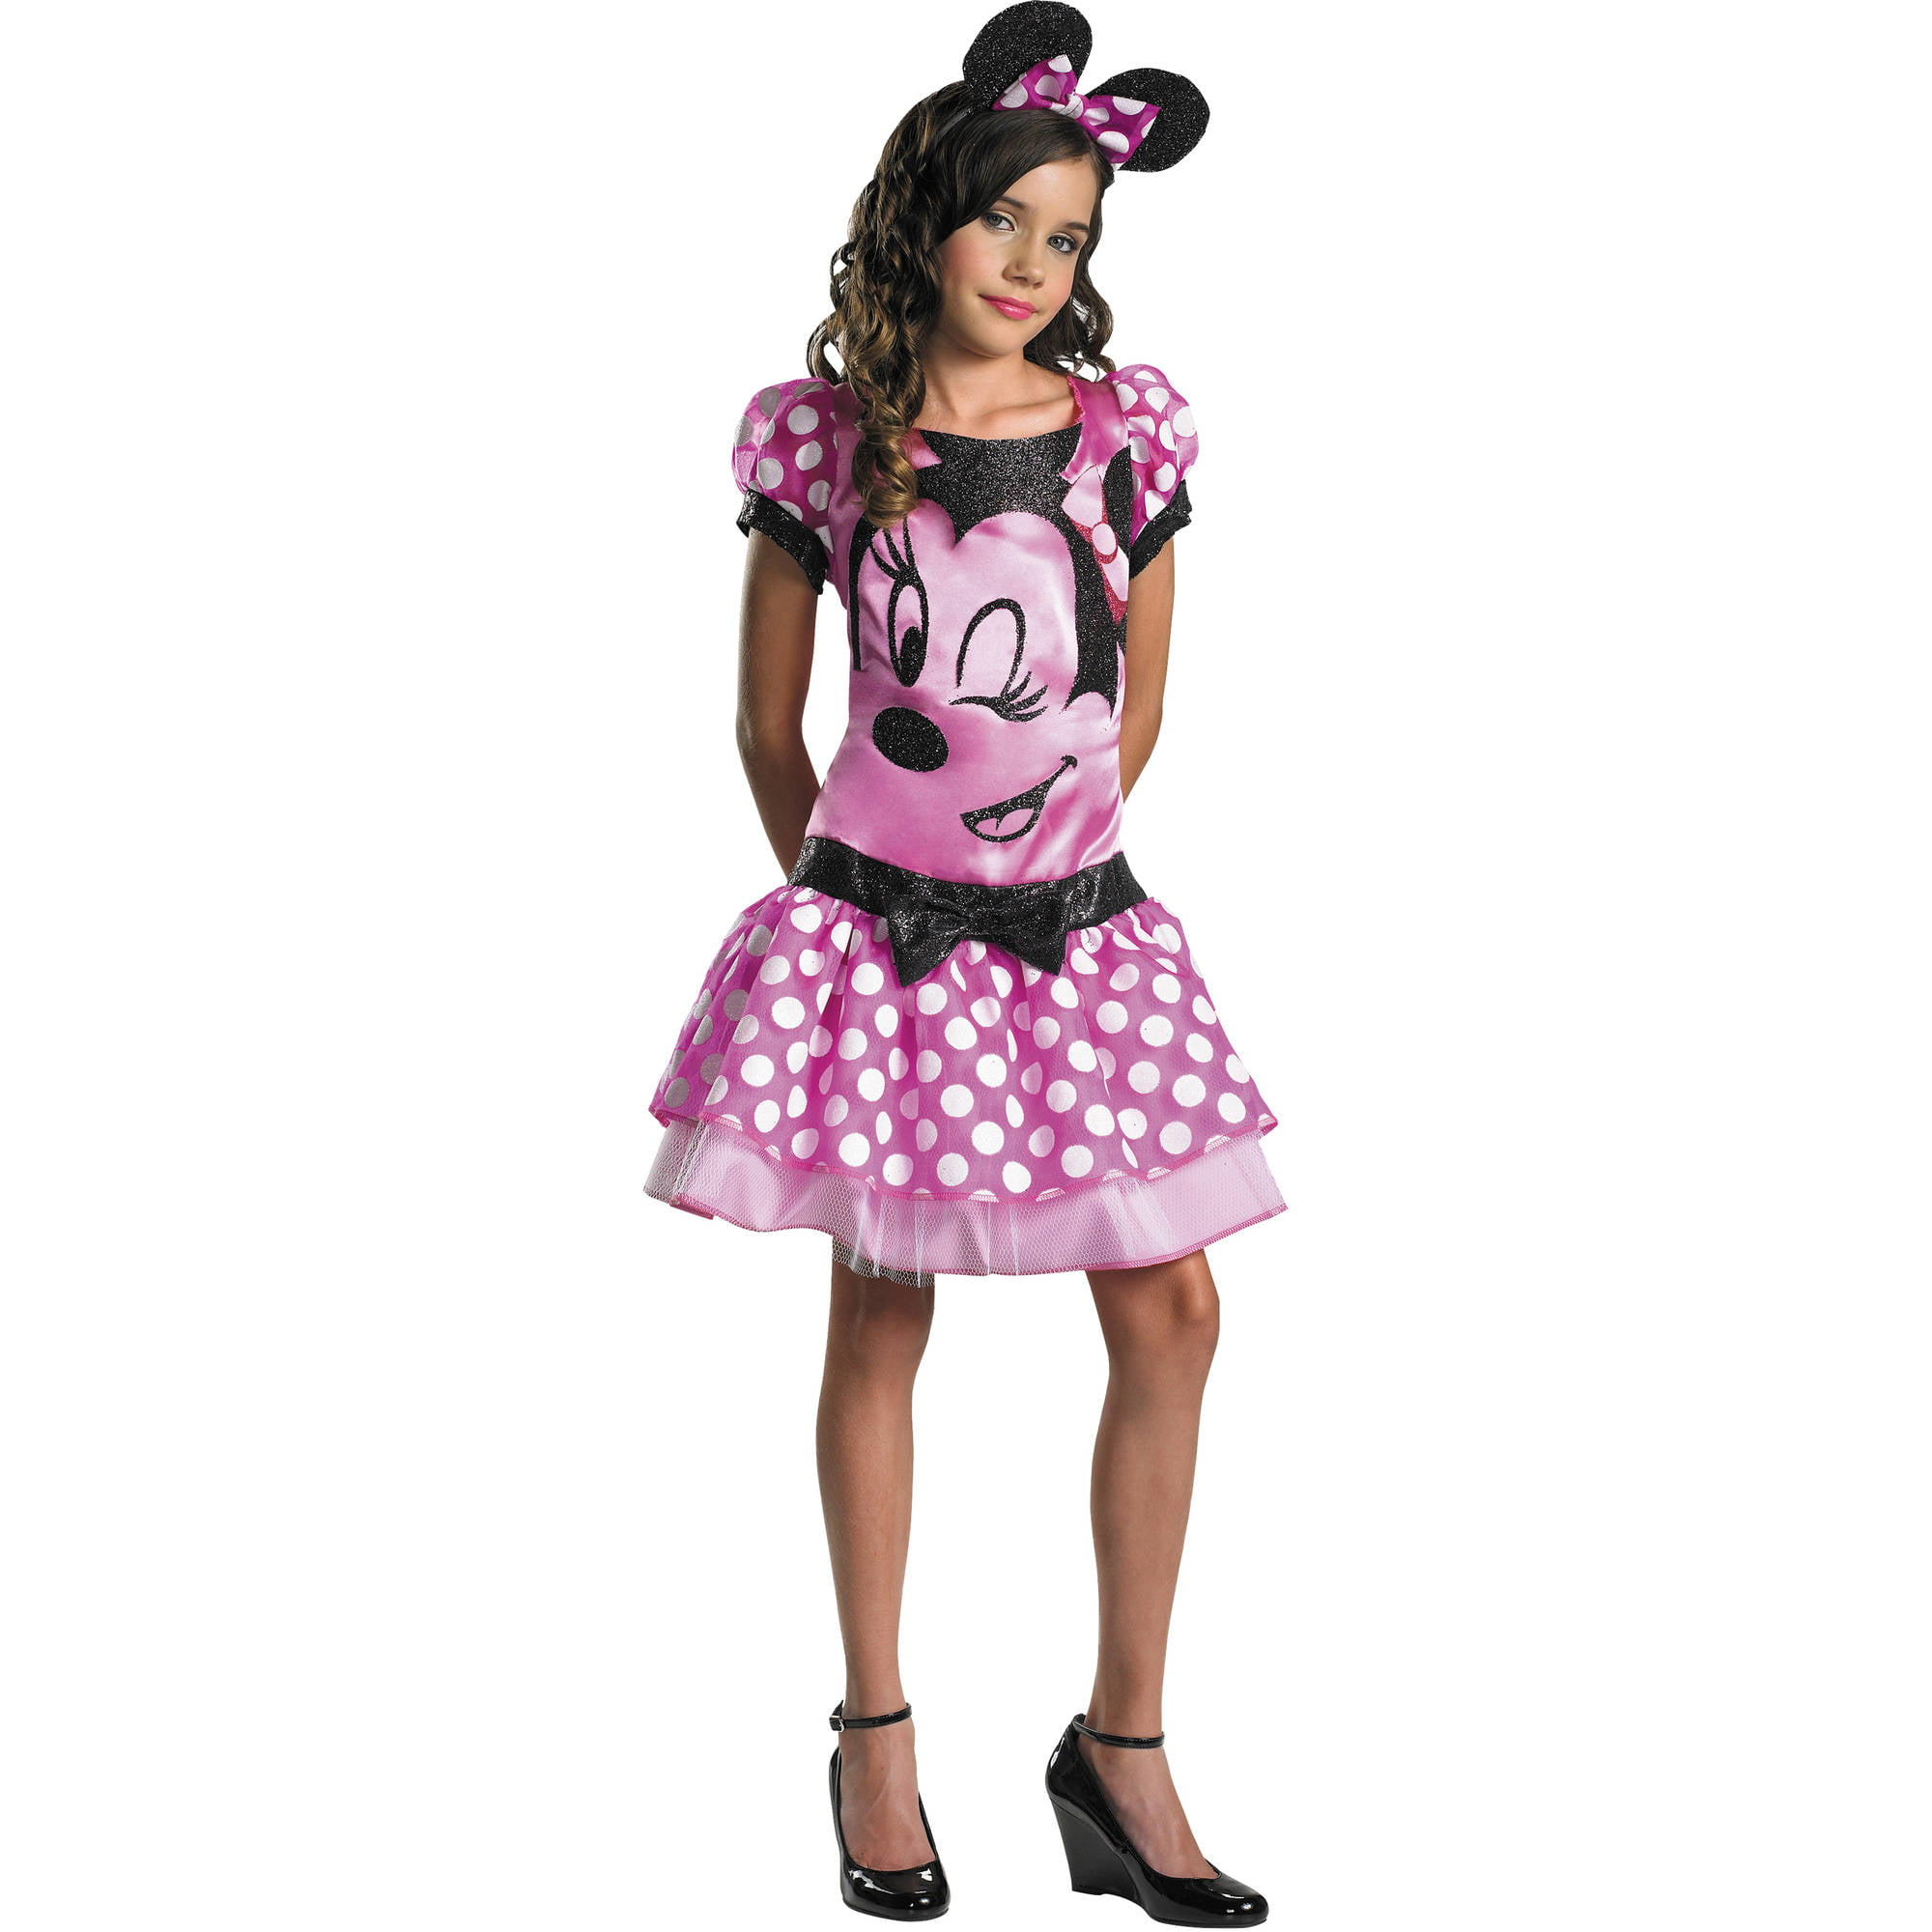 Disney Clubhouse Minnie Mouse Pink Child's Halloween Costume - Walmart.com